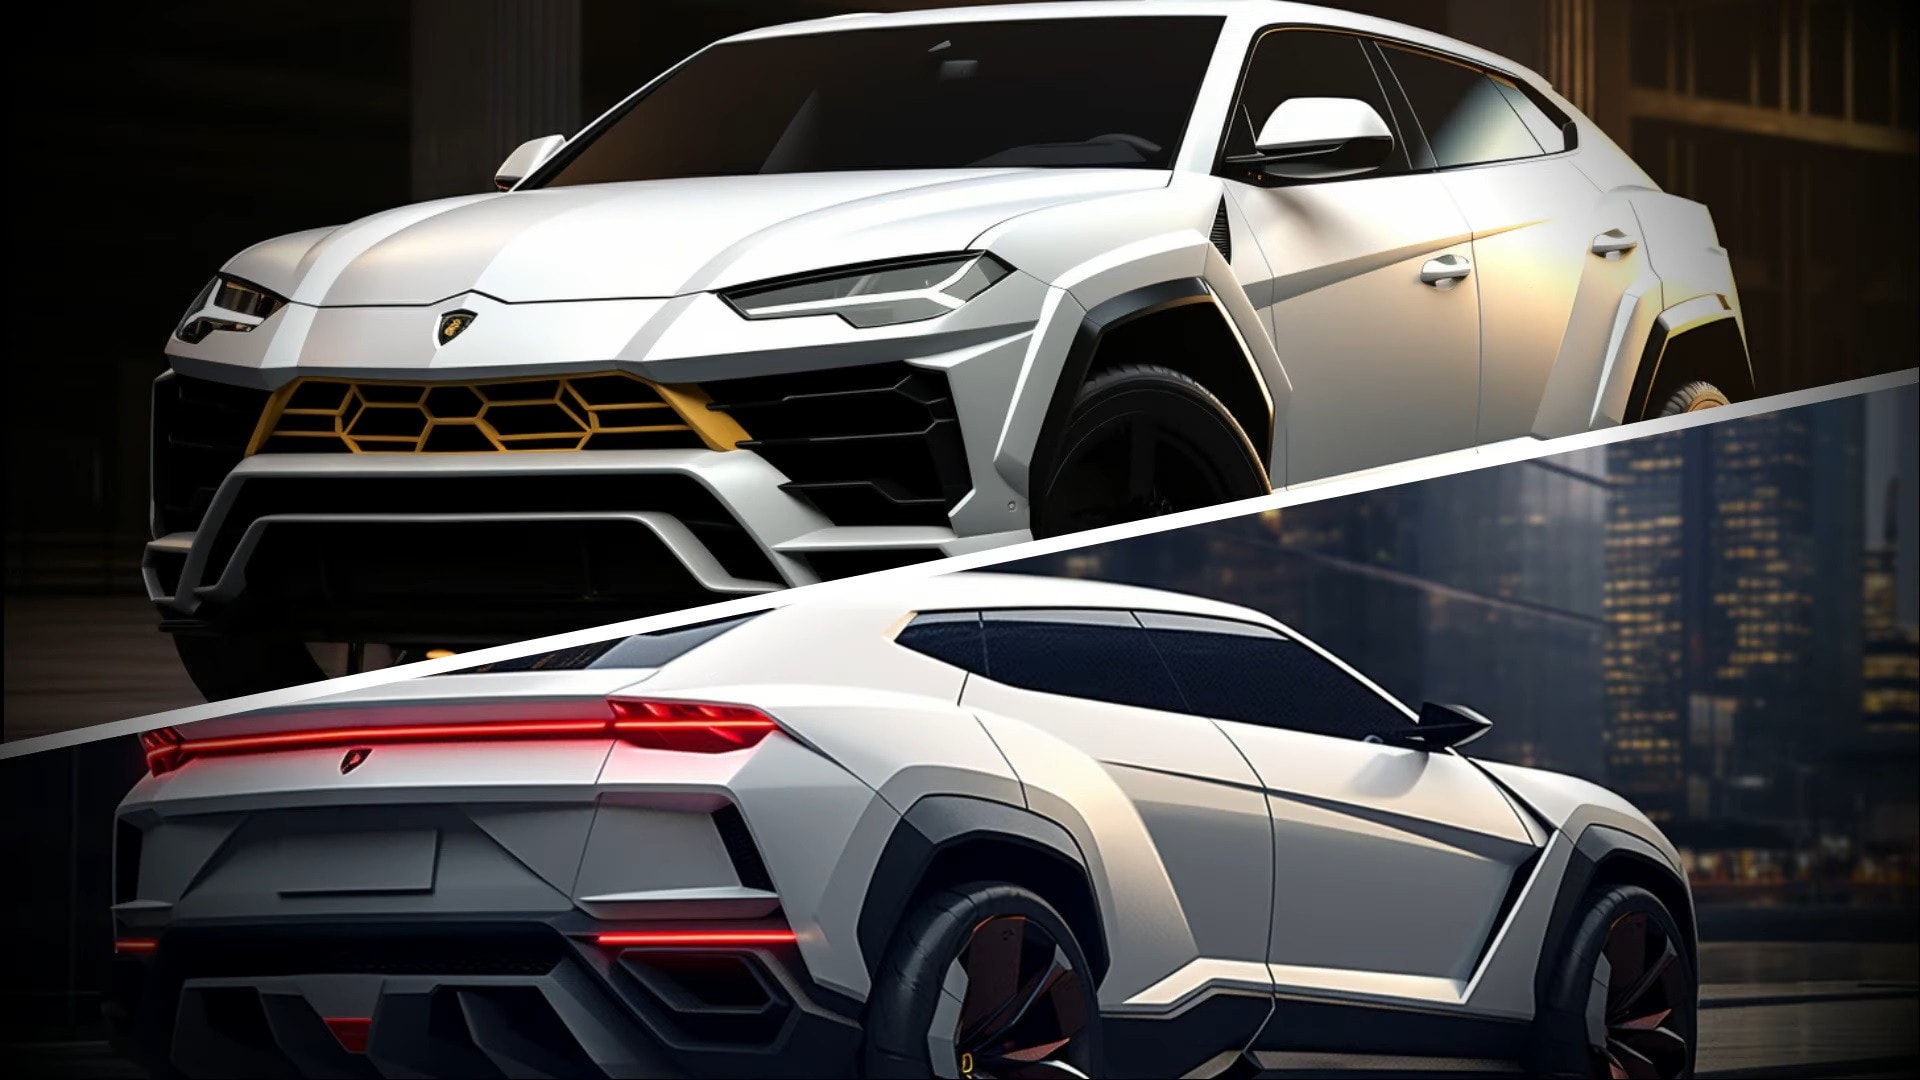 https://s1.cdn.autoevolution.com/images/news/lamborghini-urus-gains-a-second-facelift-in-fantasy-land-complete-with-electrified-power-226083_1.jpg